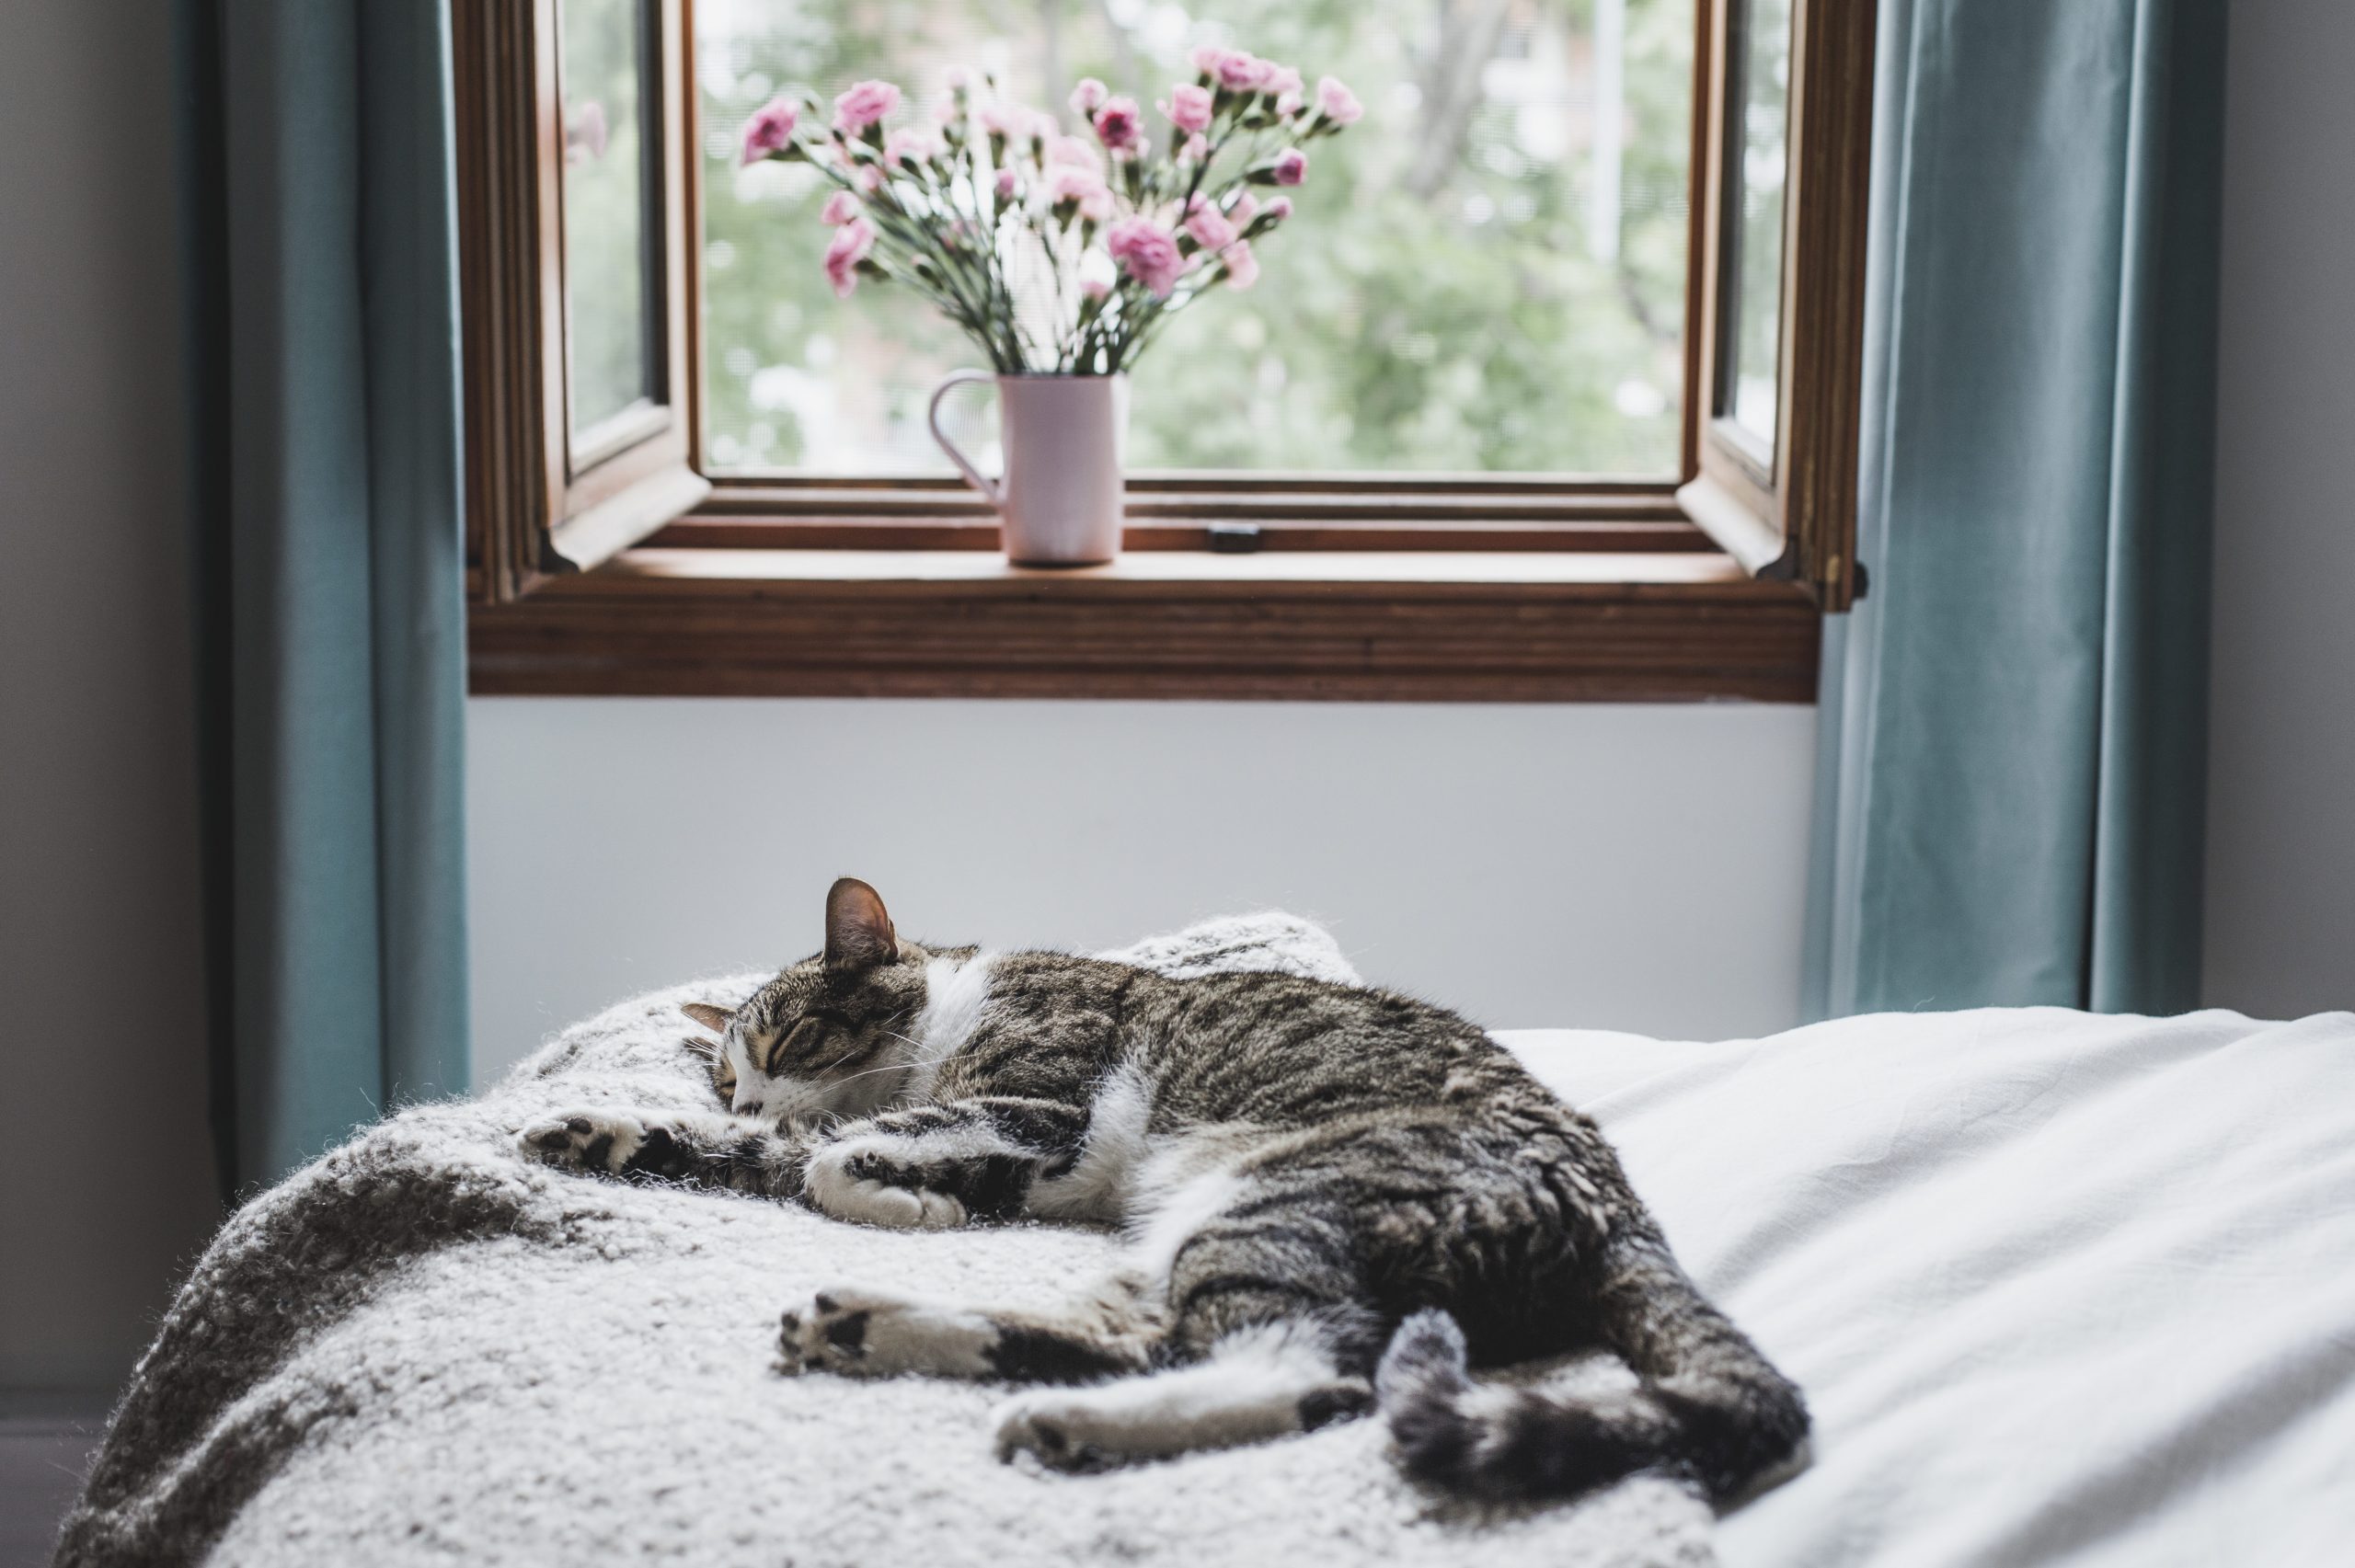 Should You Let Your Cat Sleep in Your Bed? | Reader's Digest